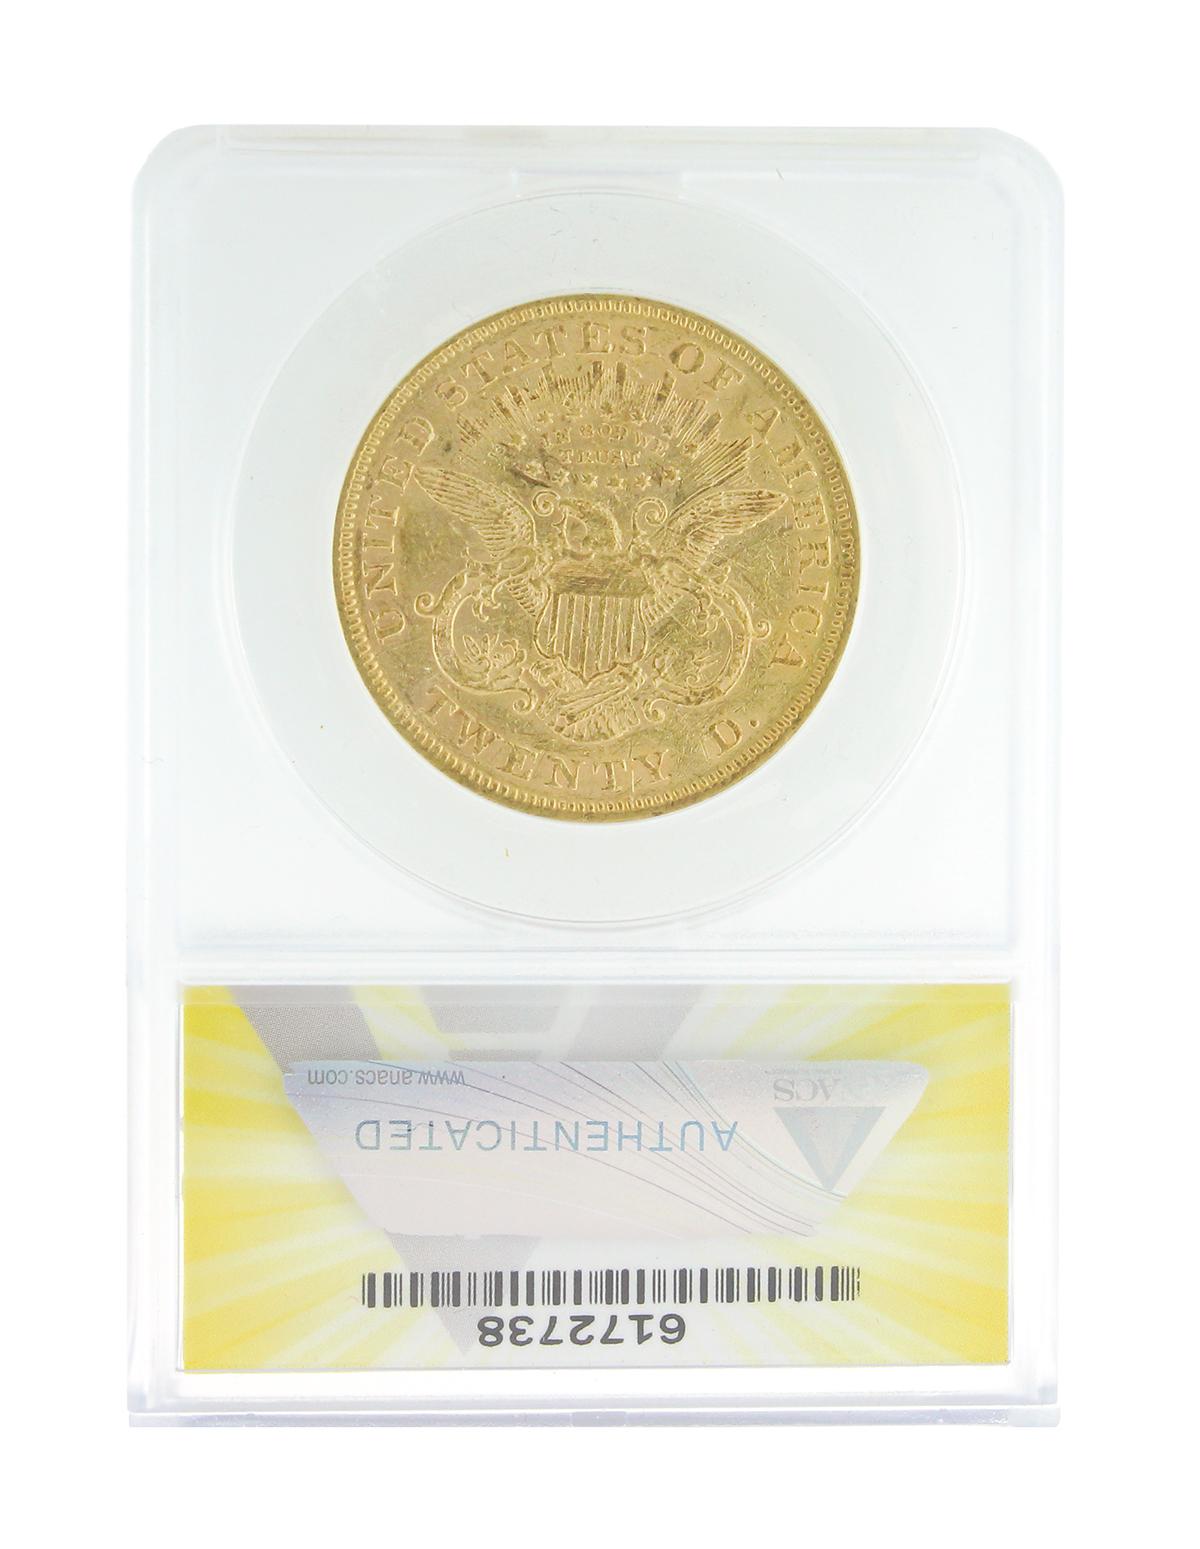 *Extremely Rare 1867 $20 U.S. Liberty Head Gold Coin (DF)